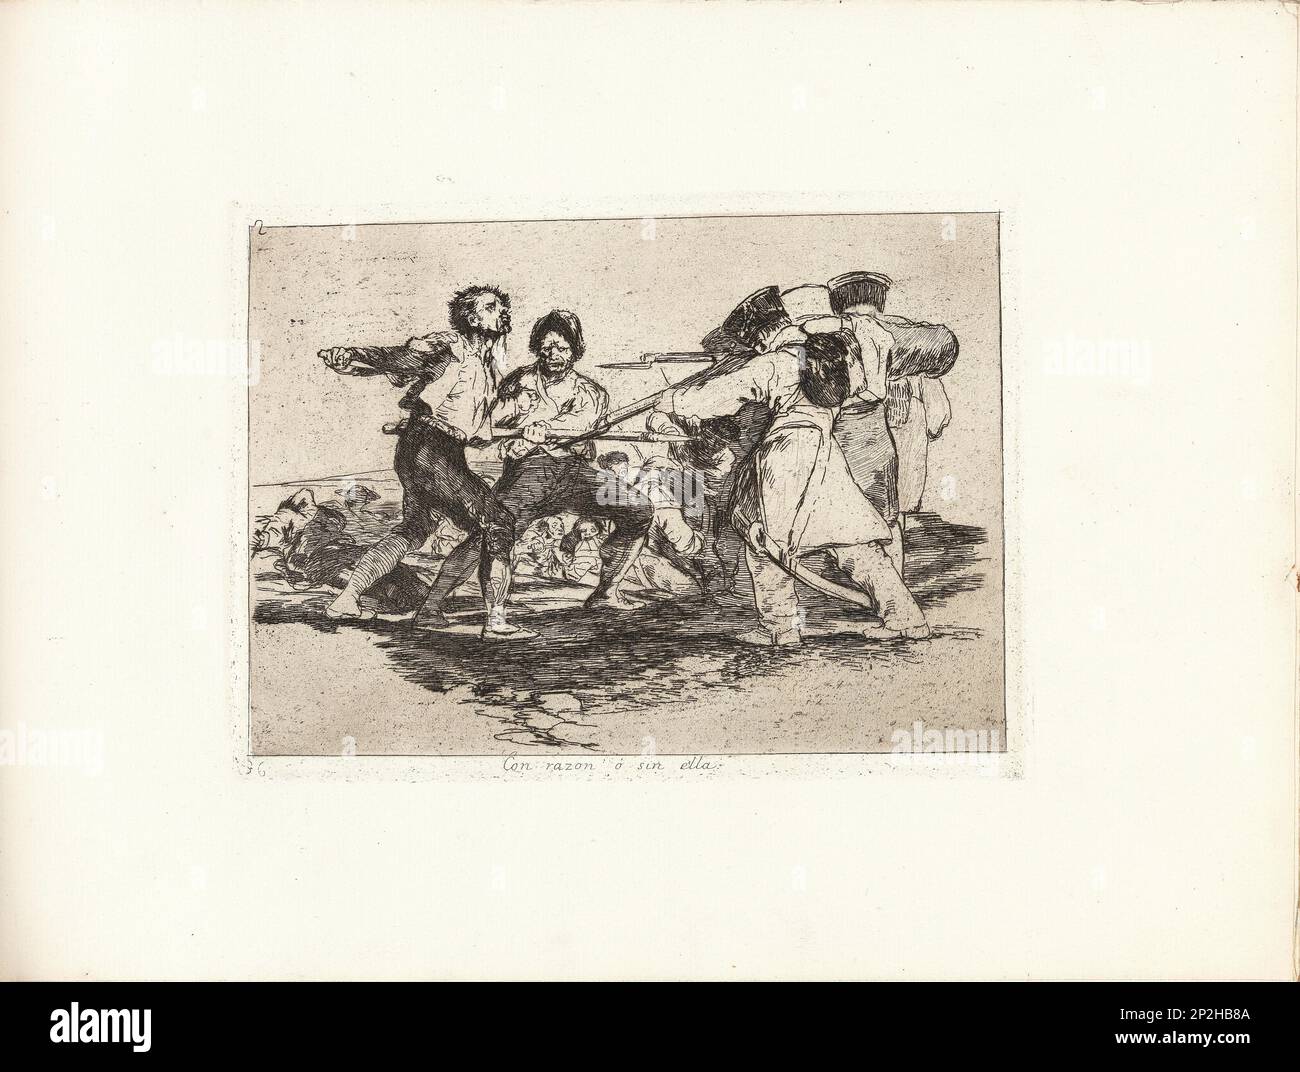 Los Desastres de la Guerra (The Disasters of War), Plate 2: Con razon &#xf3; sin ella (With or without reason) , 1810s. Private Collection. Stock Photo